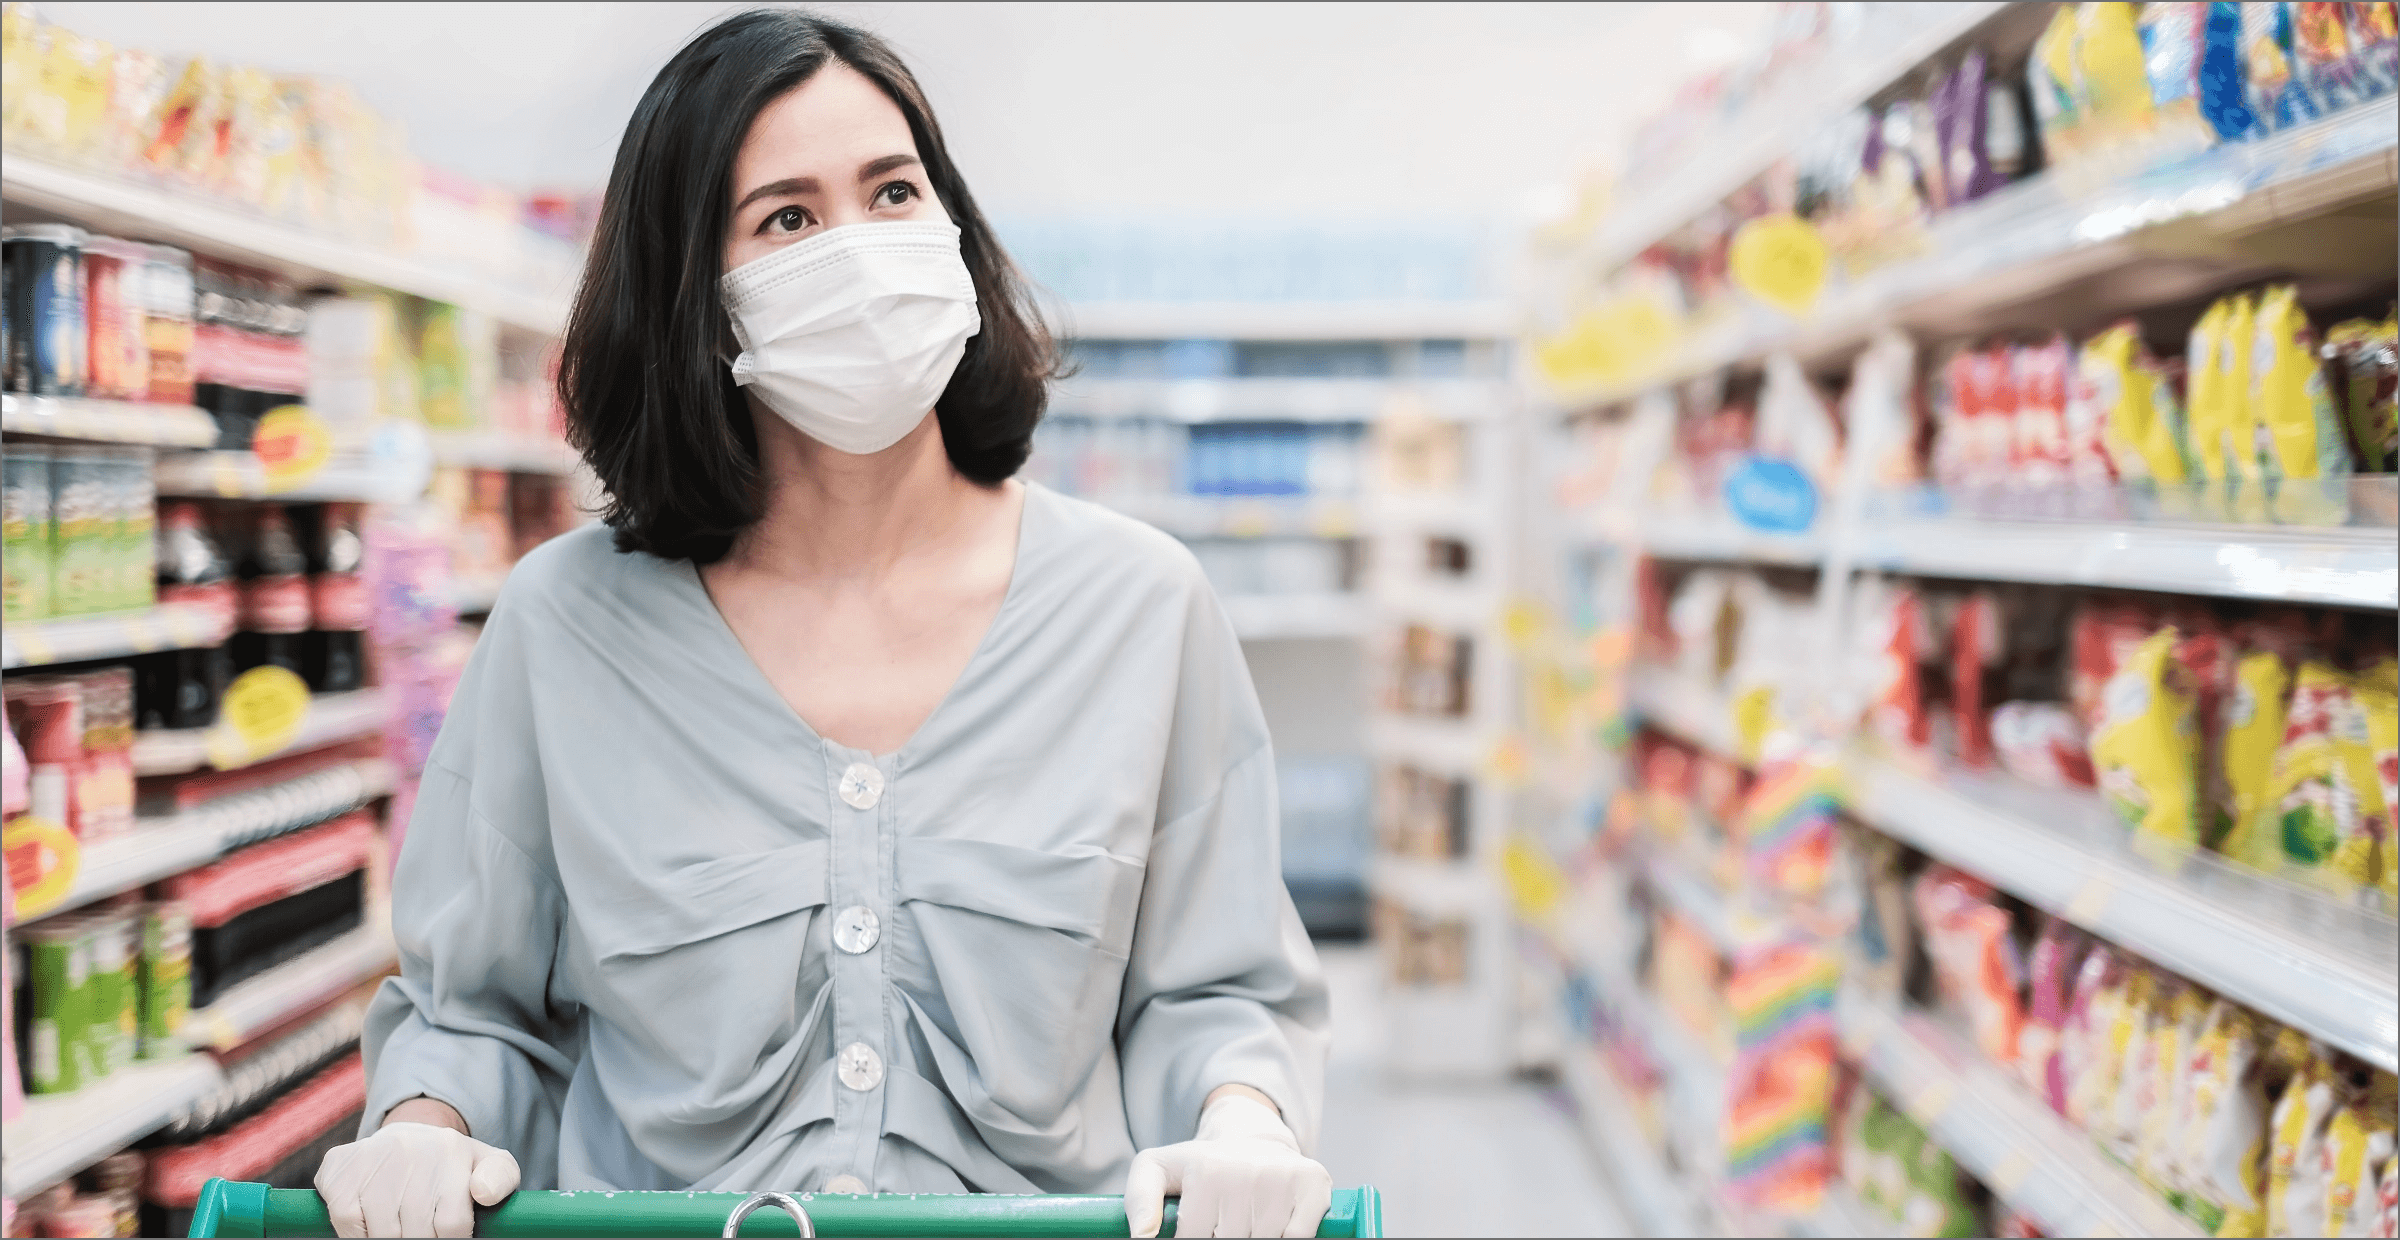 A photograph shows a woman shopping in a grocery store. She is pushing a cart, and wearing a medical facemask.